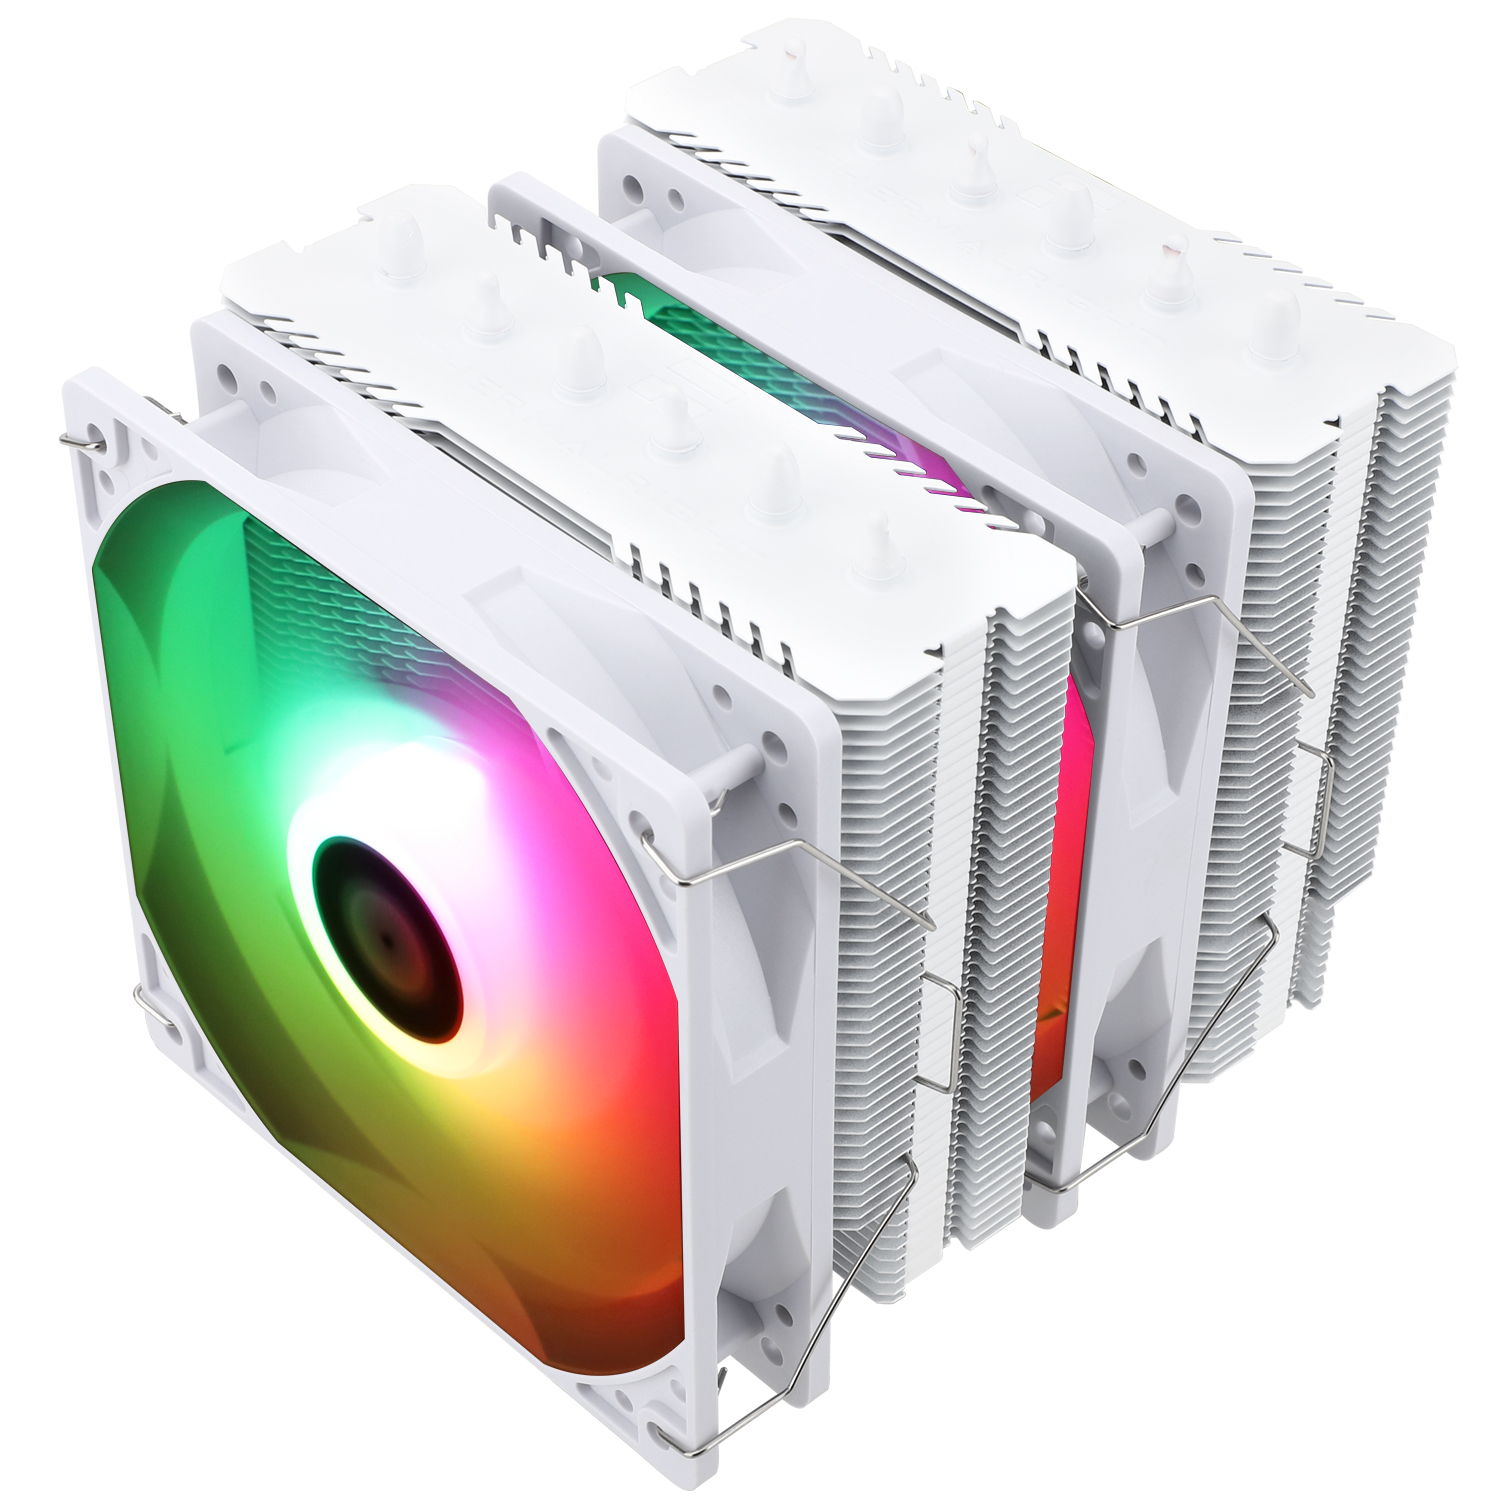 Thermalright Peerless Assasin 120 SE A-RGB White CPU Cooler - 120mm